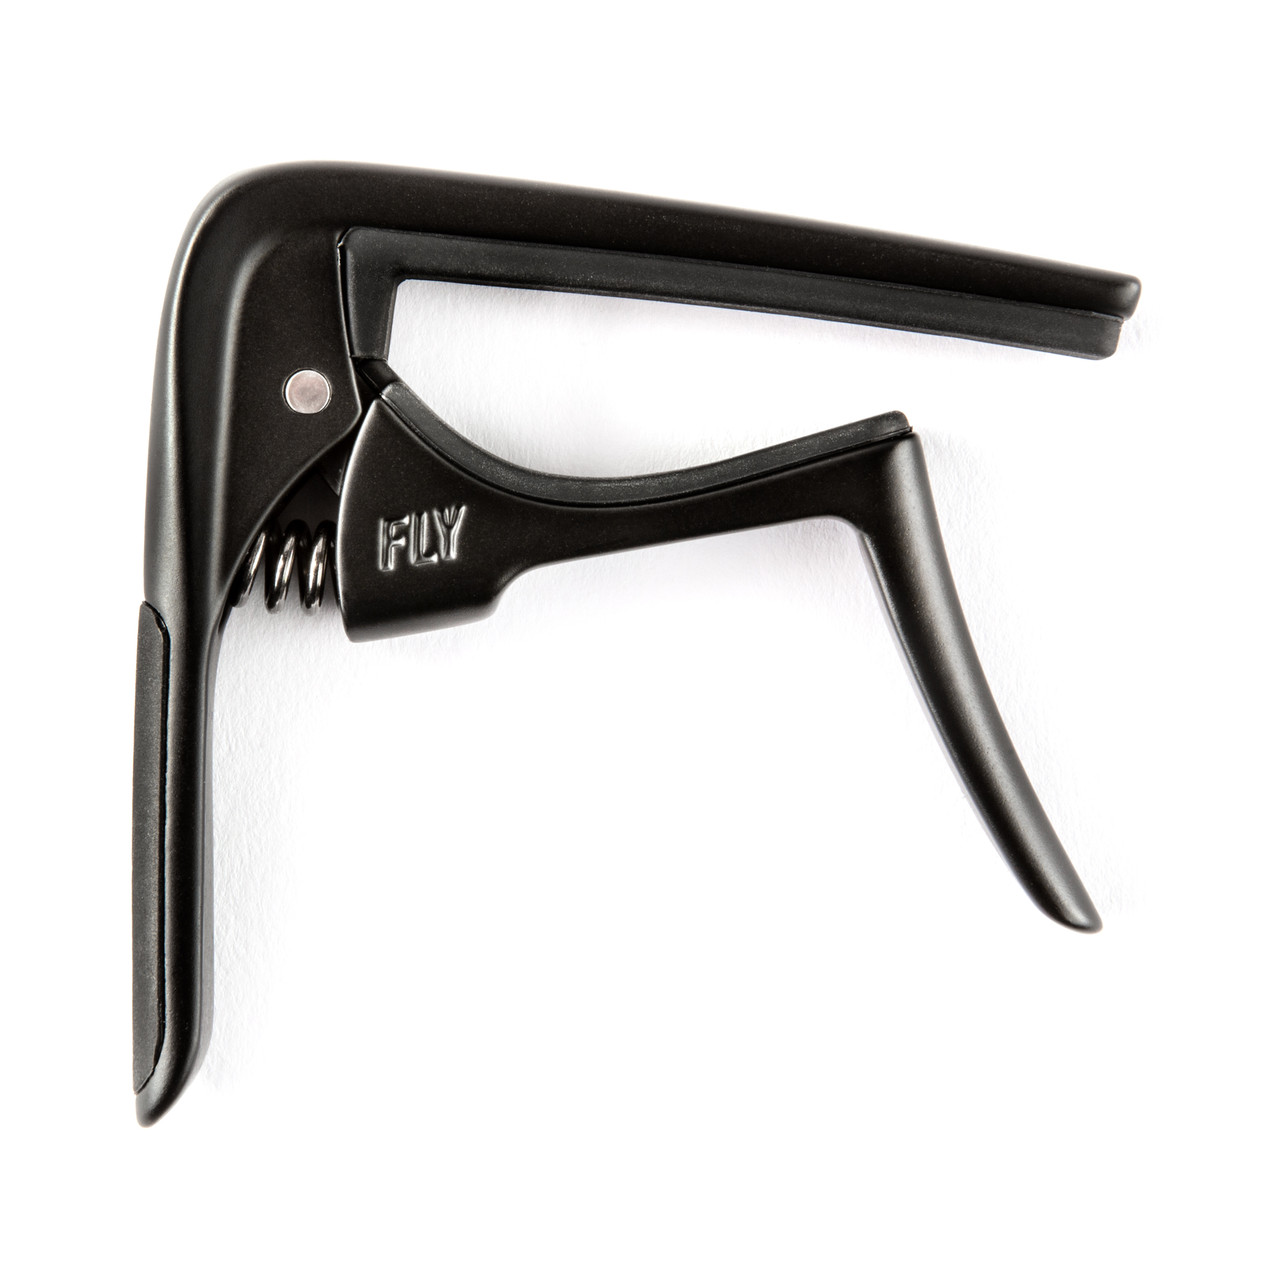 Dunlop Trigger Fly Curved Capo, Black